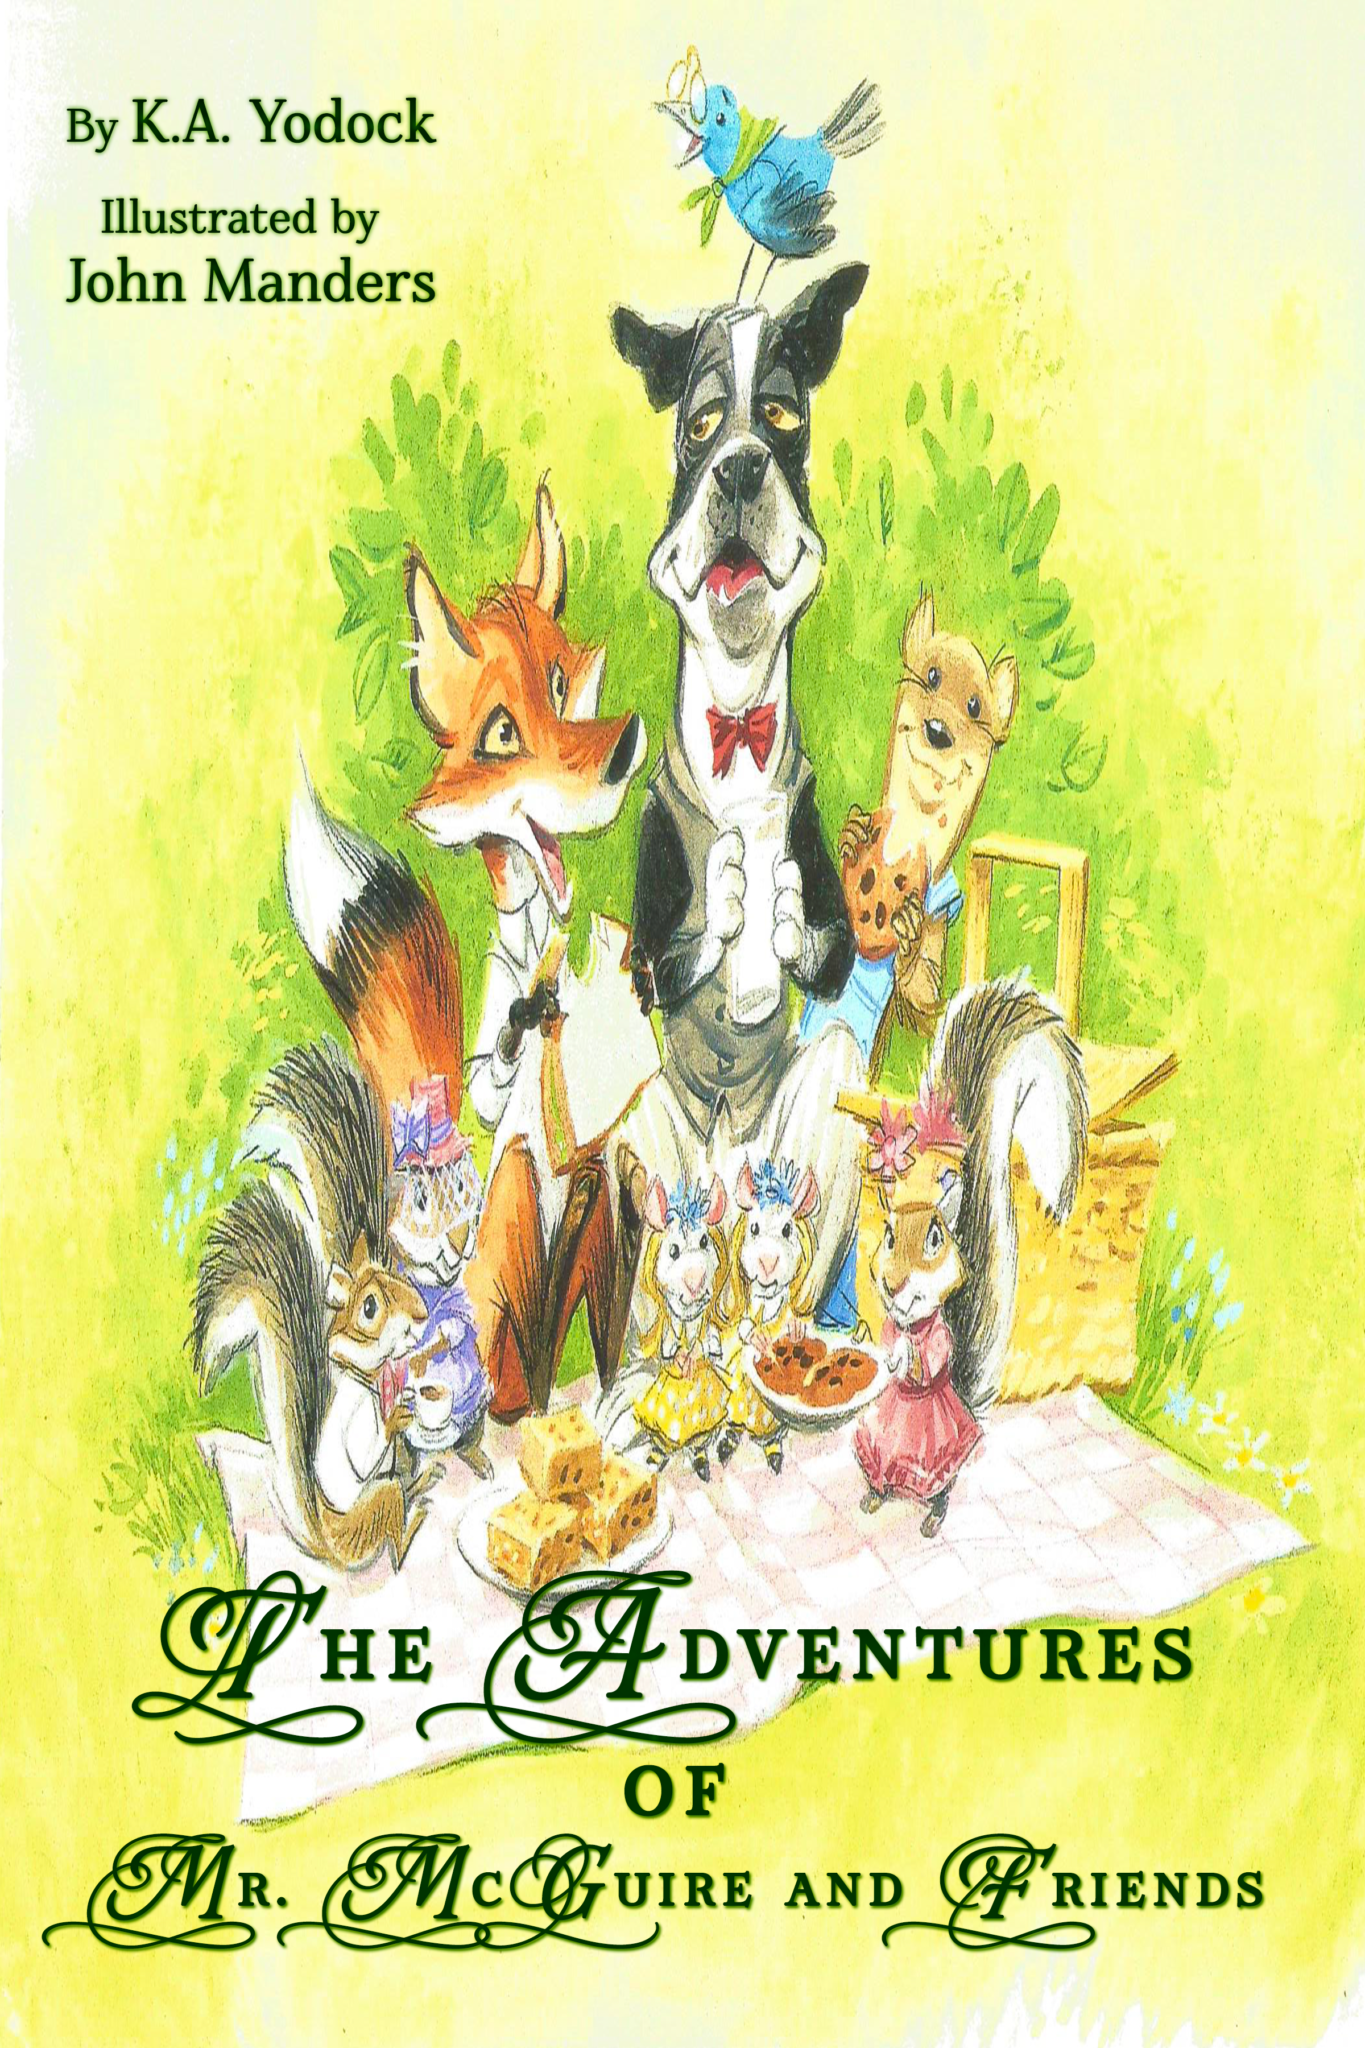 The Adventures of Mr. McGuire and Friends by K.A. Yodock